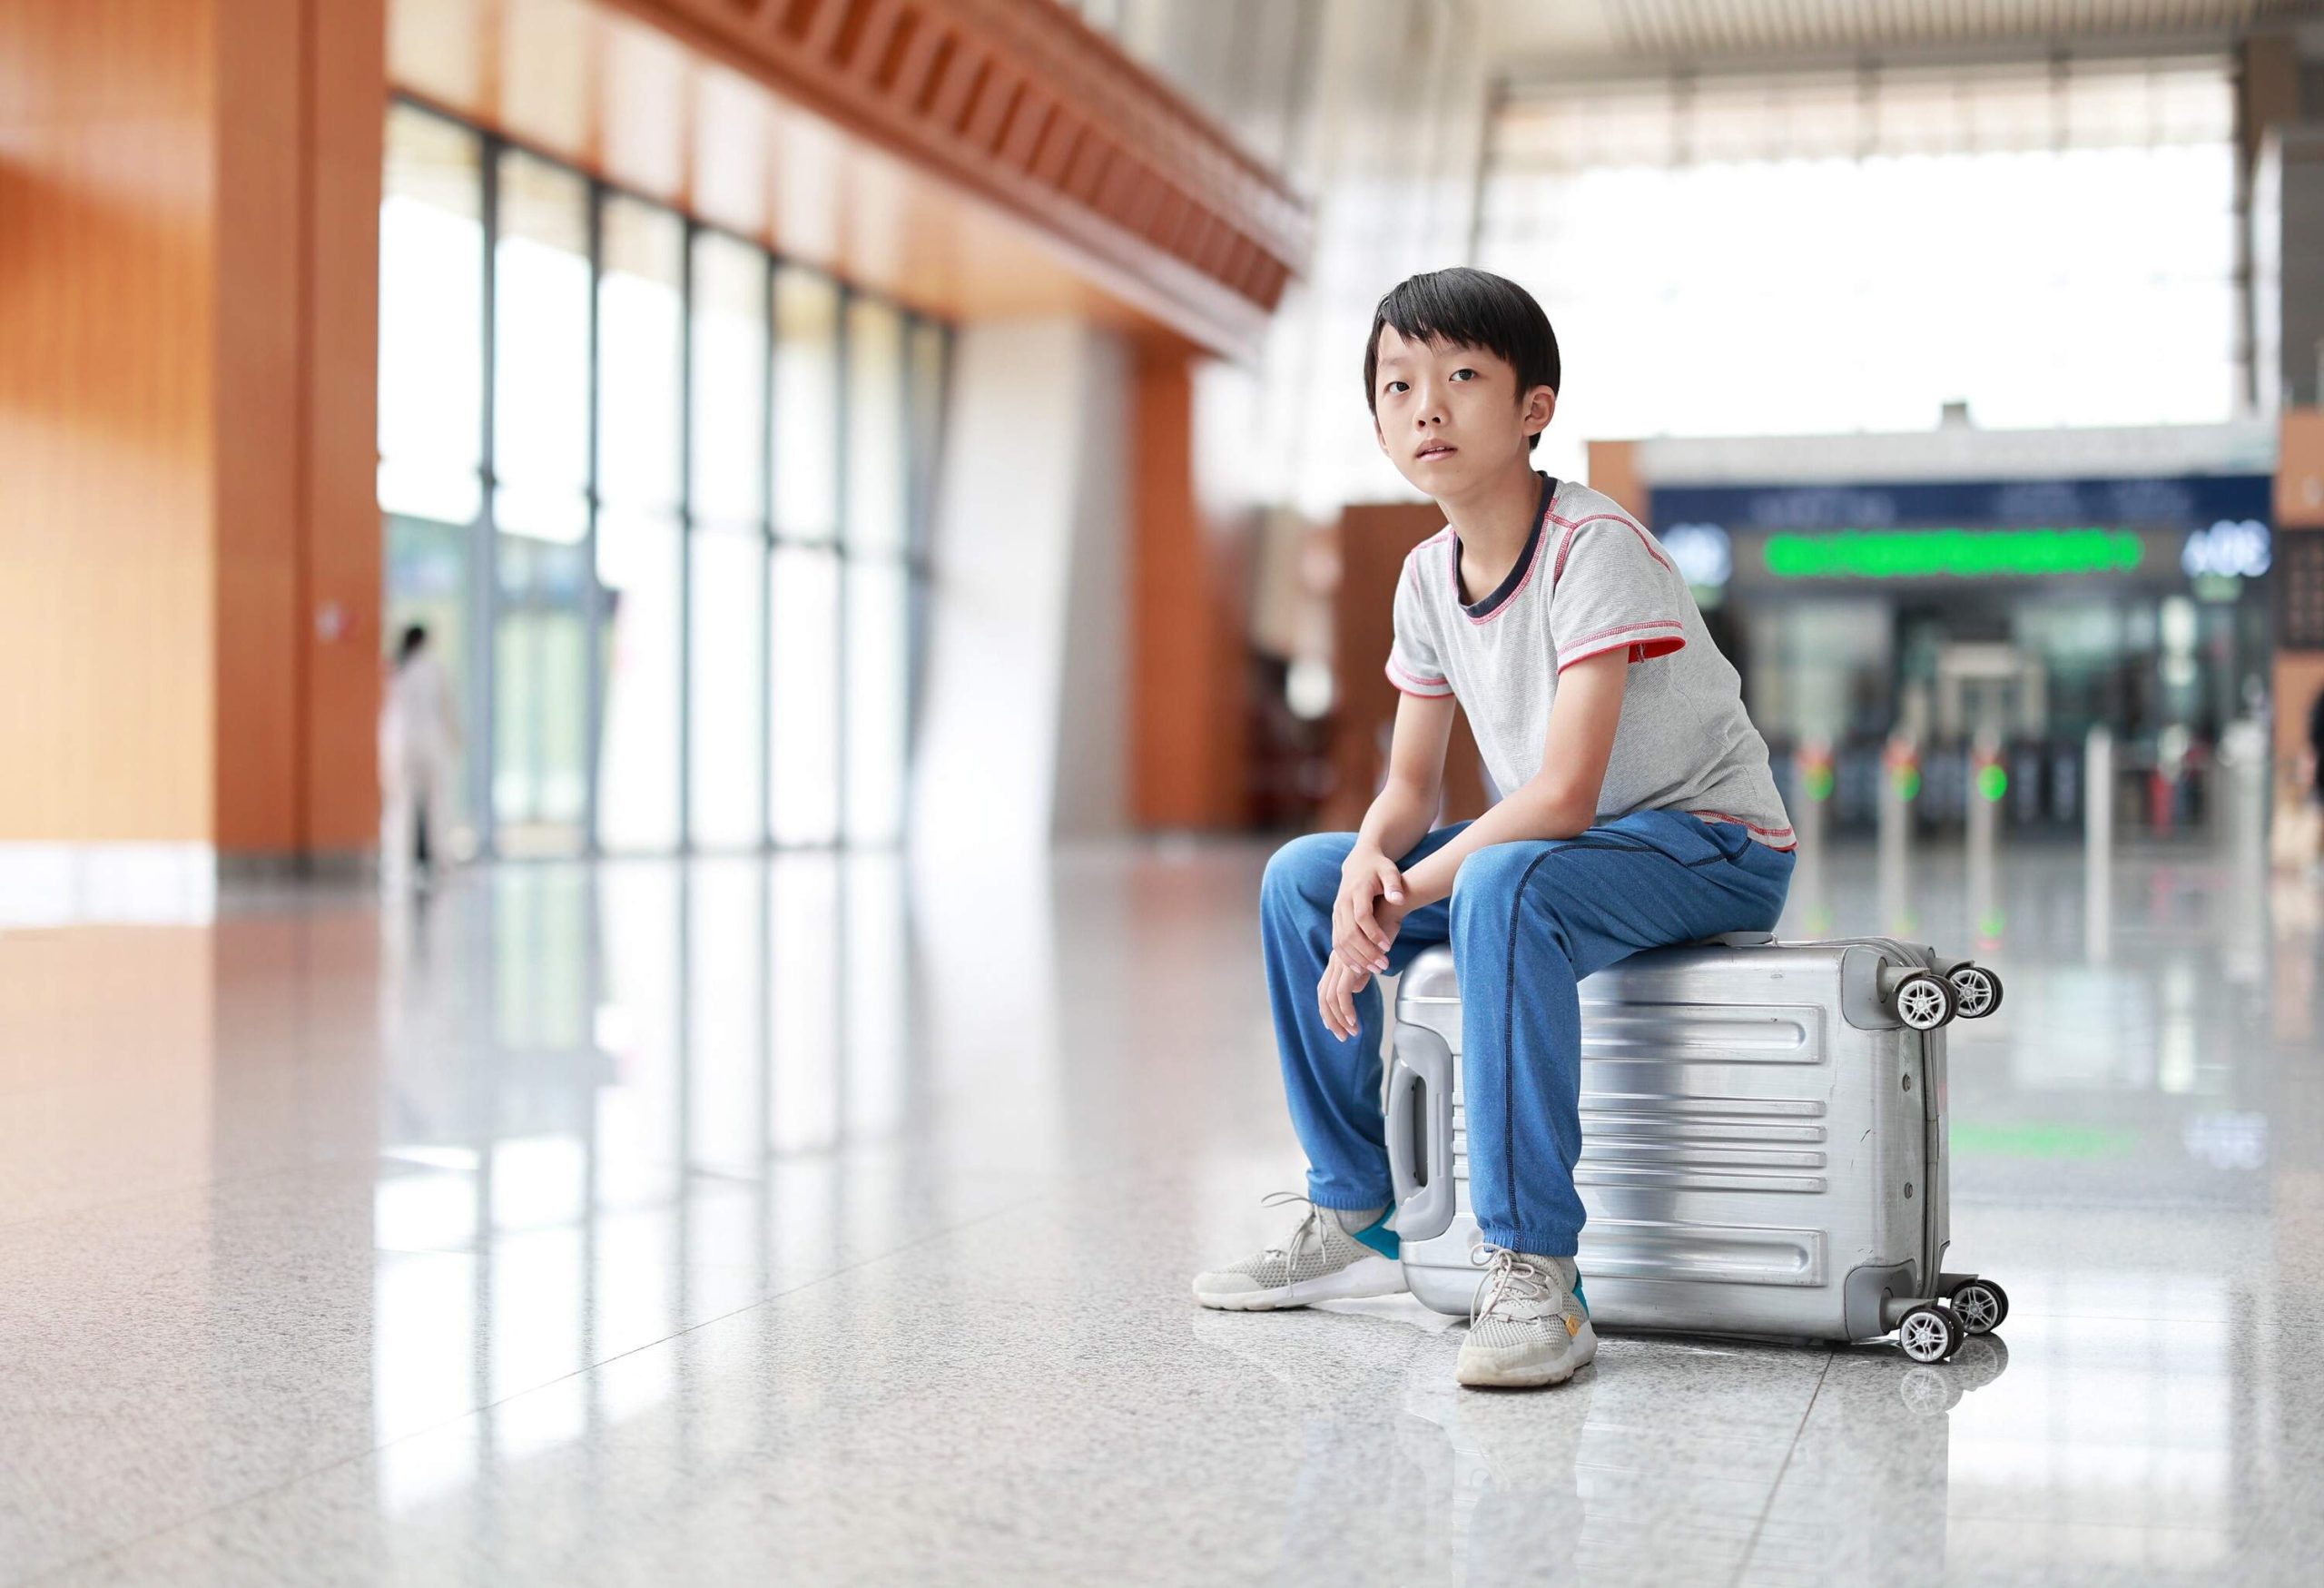 Little boy waiting in the airport, child travel